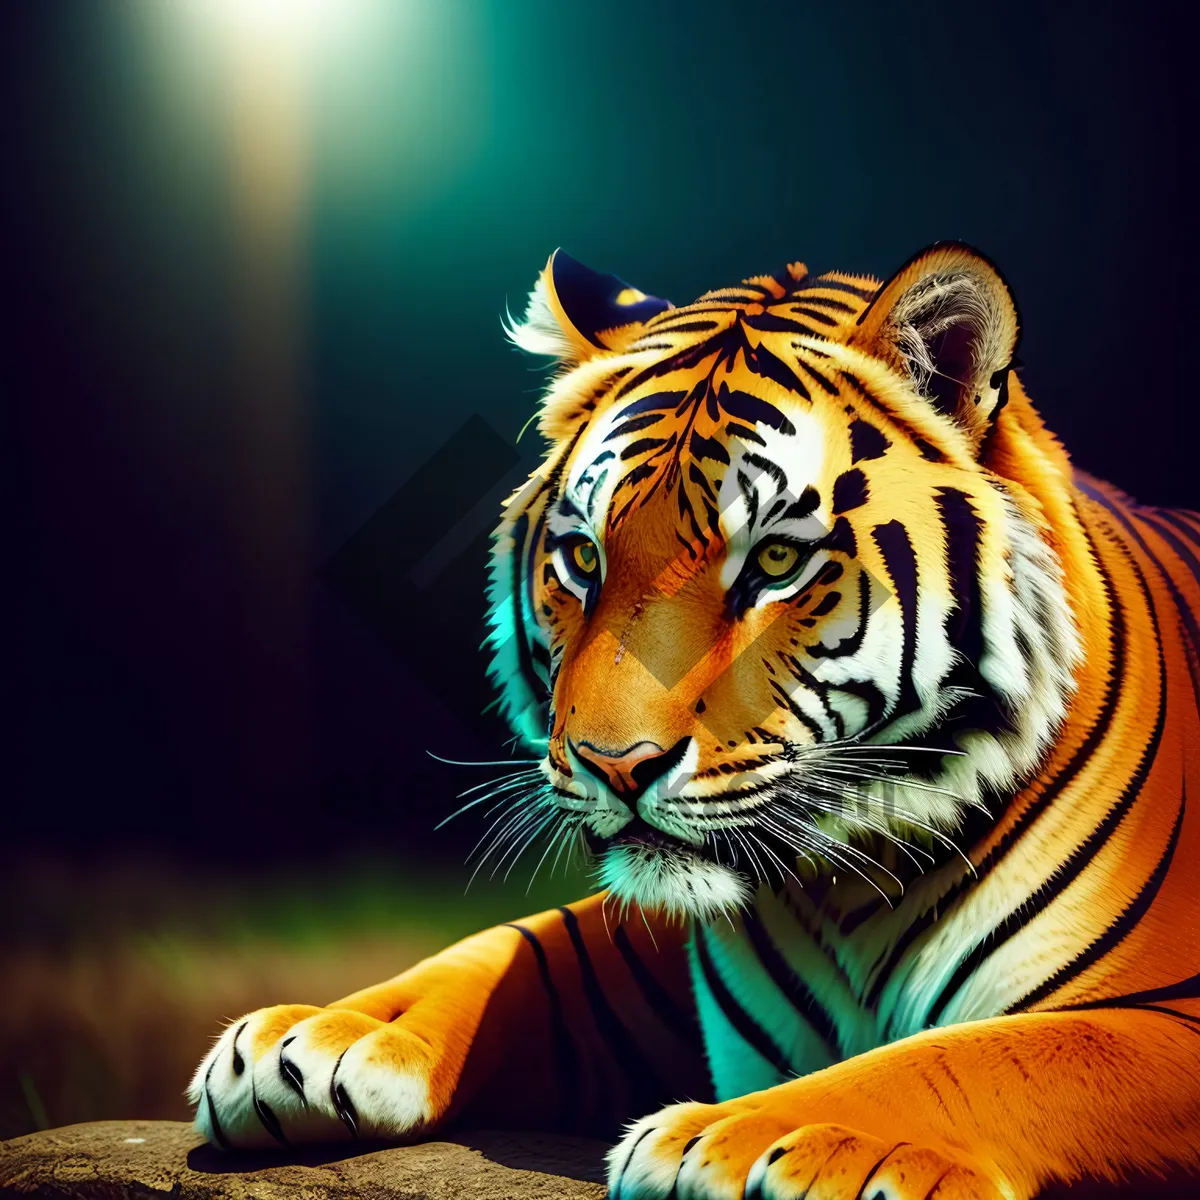 Picture of Fearsome Tiger: Majestic and Dangerous Wildlife Predator